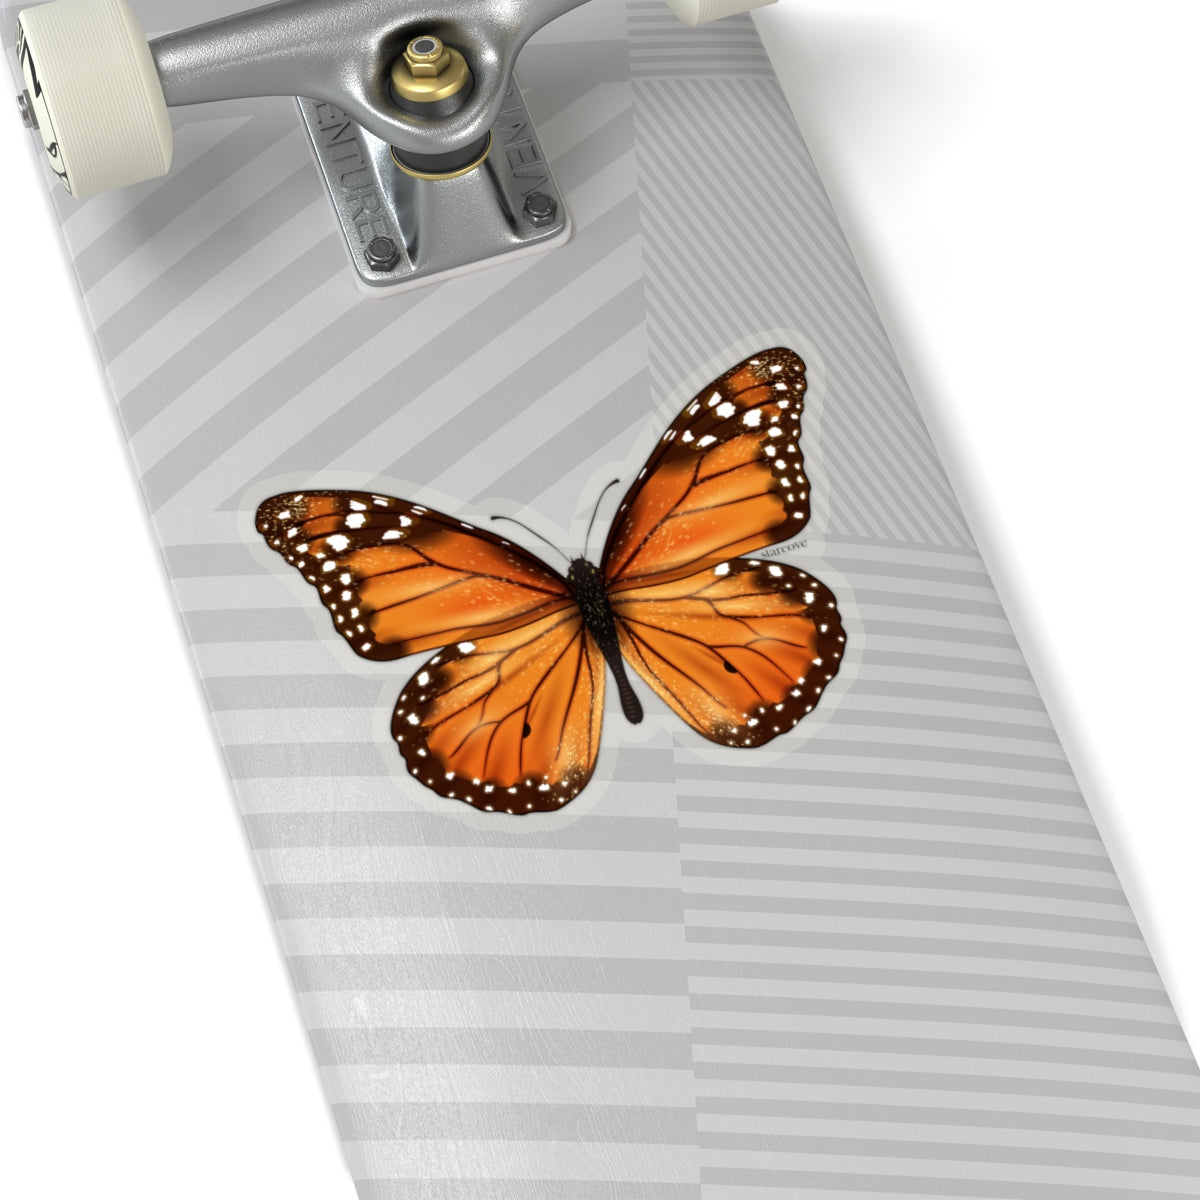 Monarch Butterfly Decal Art Stickers decoration Insect Laptop Vinyl Cute Waterproof Waterbottle Tumbler Car Bumper Aesthetic Label Wall Starcove Fashion